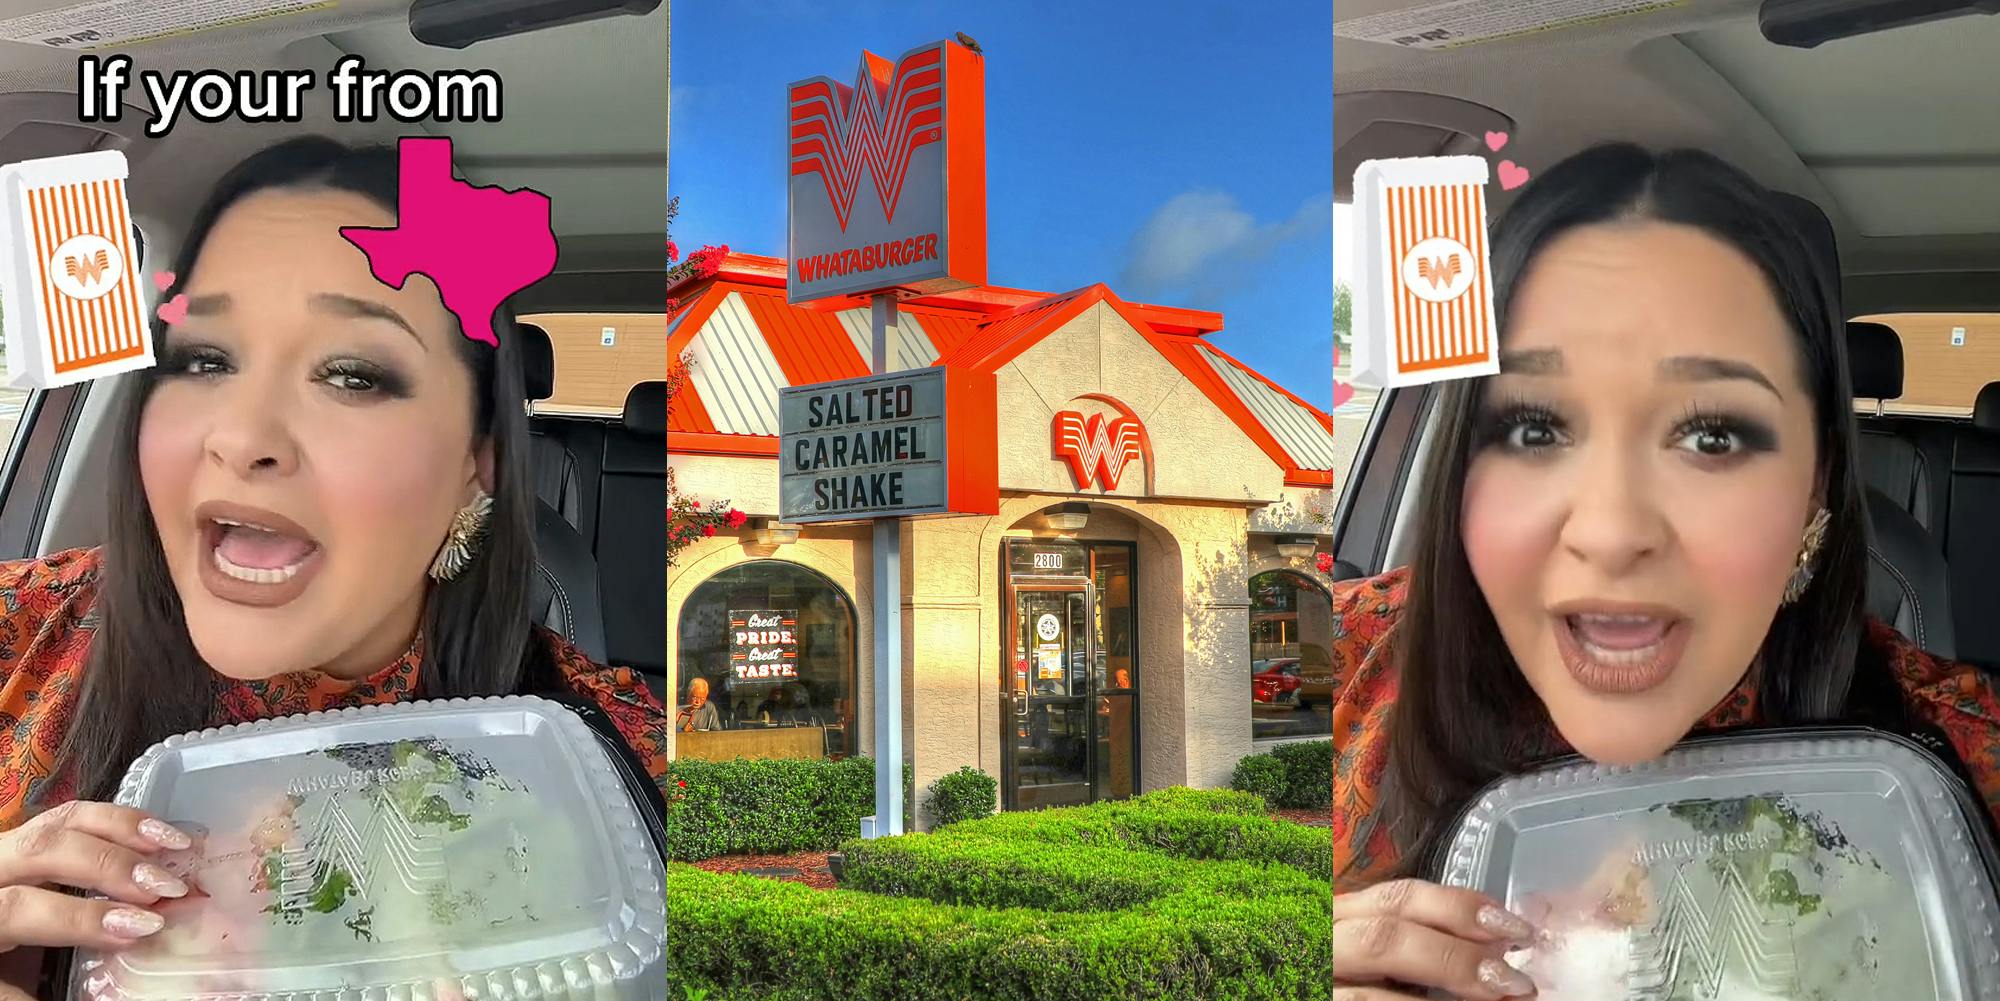 woman speaking in car holding Whataburger food in container caption "If your from" (l) Whataburger building with sign (c) woman speaking in car holding Whataburger food in container (r)